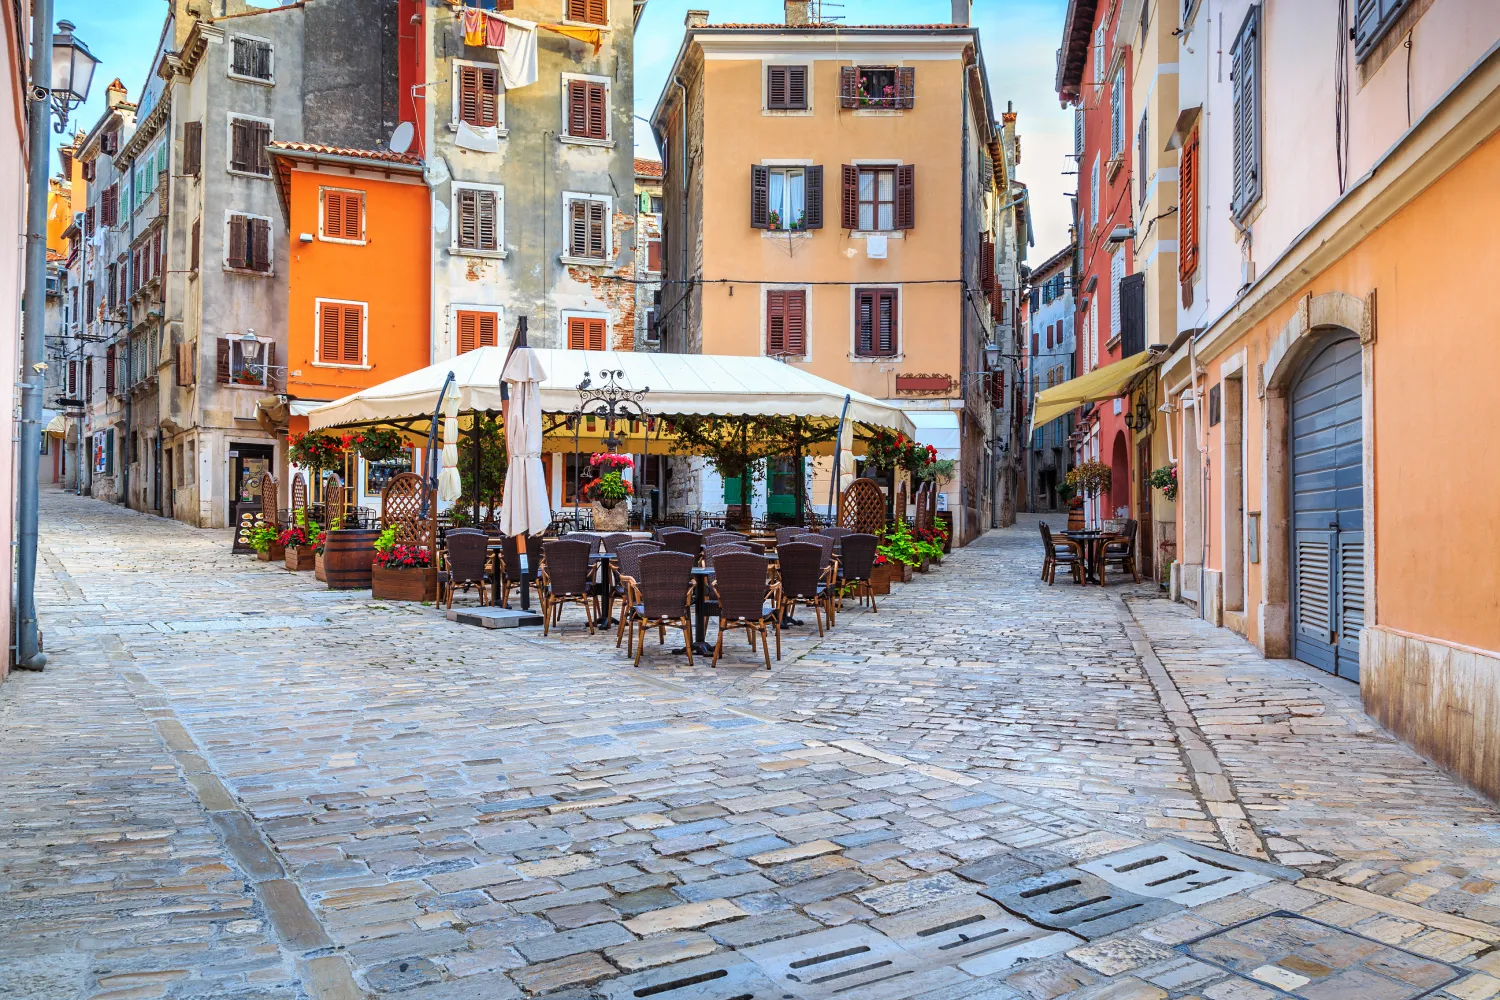 Spectacular Stone Paved Street With Colorful Houses And Typical Street Cafe Bar in Rovinj Old Town